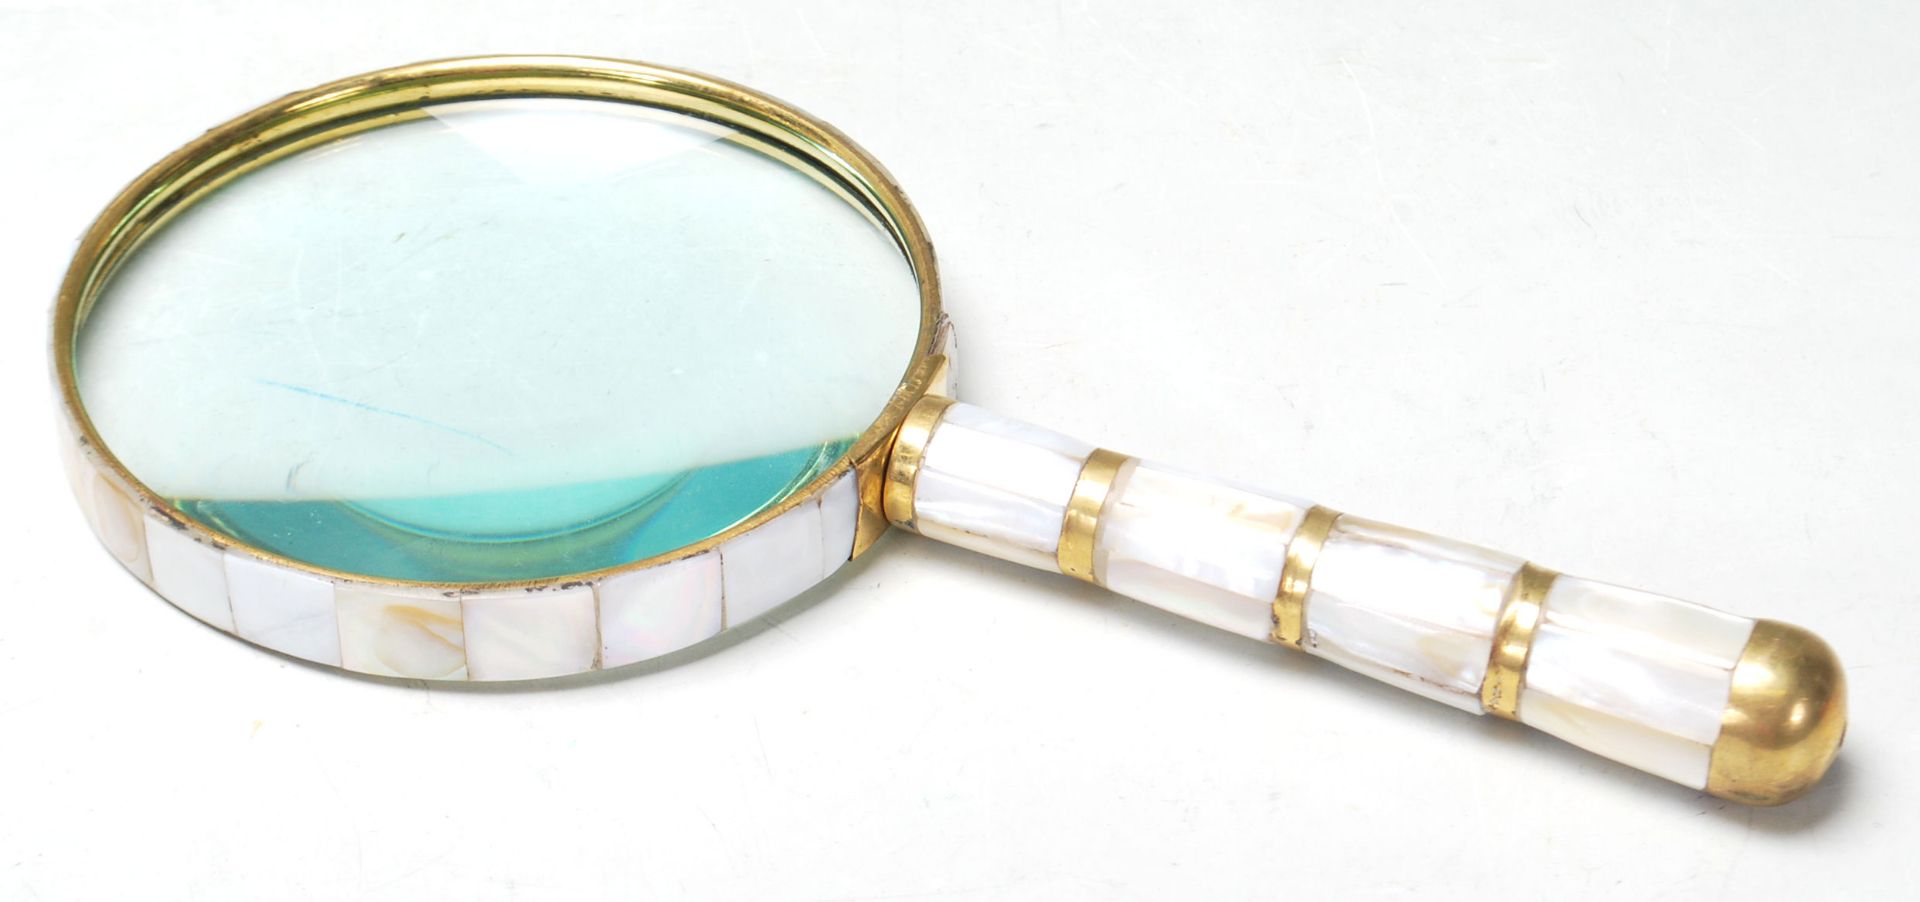 A BRASS AND FAUX MOTHER OF PEARL HAND HELD MAGNIFYING GLASS.